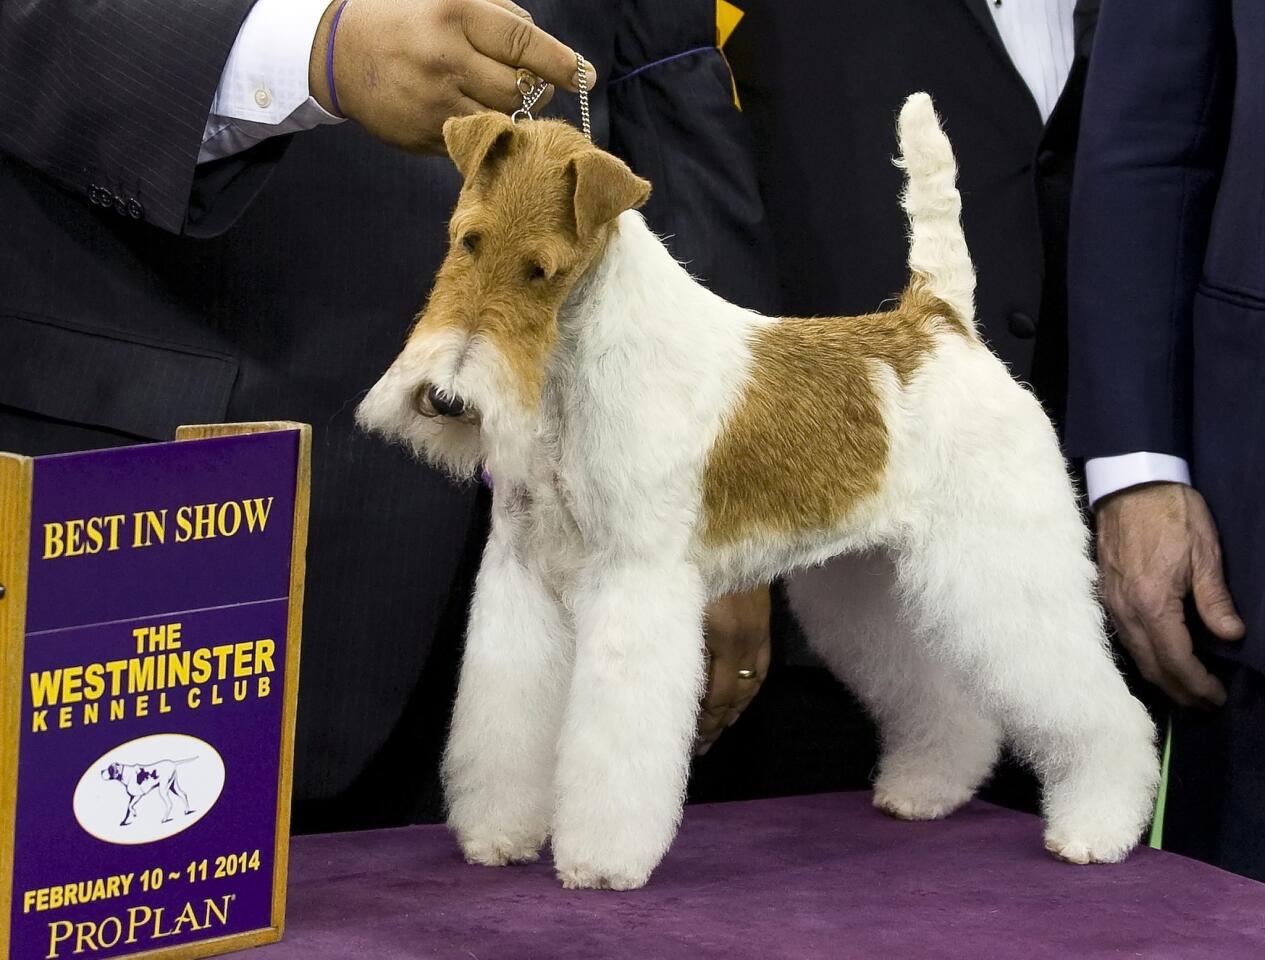 Best in Show winner Sky, a wire fox terrier whose handler is from Rialto and one of whose owners is from Malibu, poses for photos at the 138th Westminster Kennel Club Dog Show in New York.